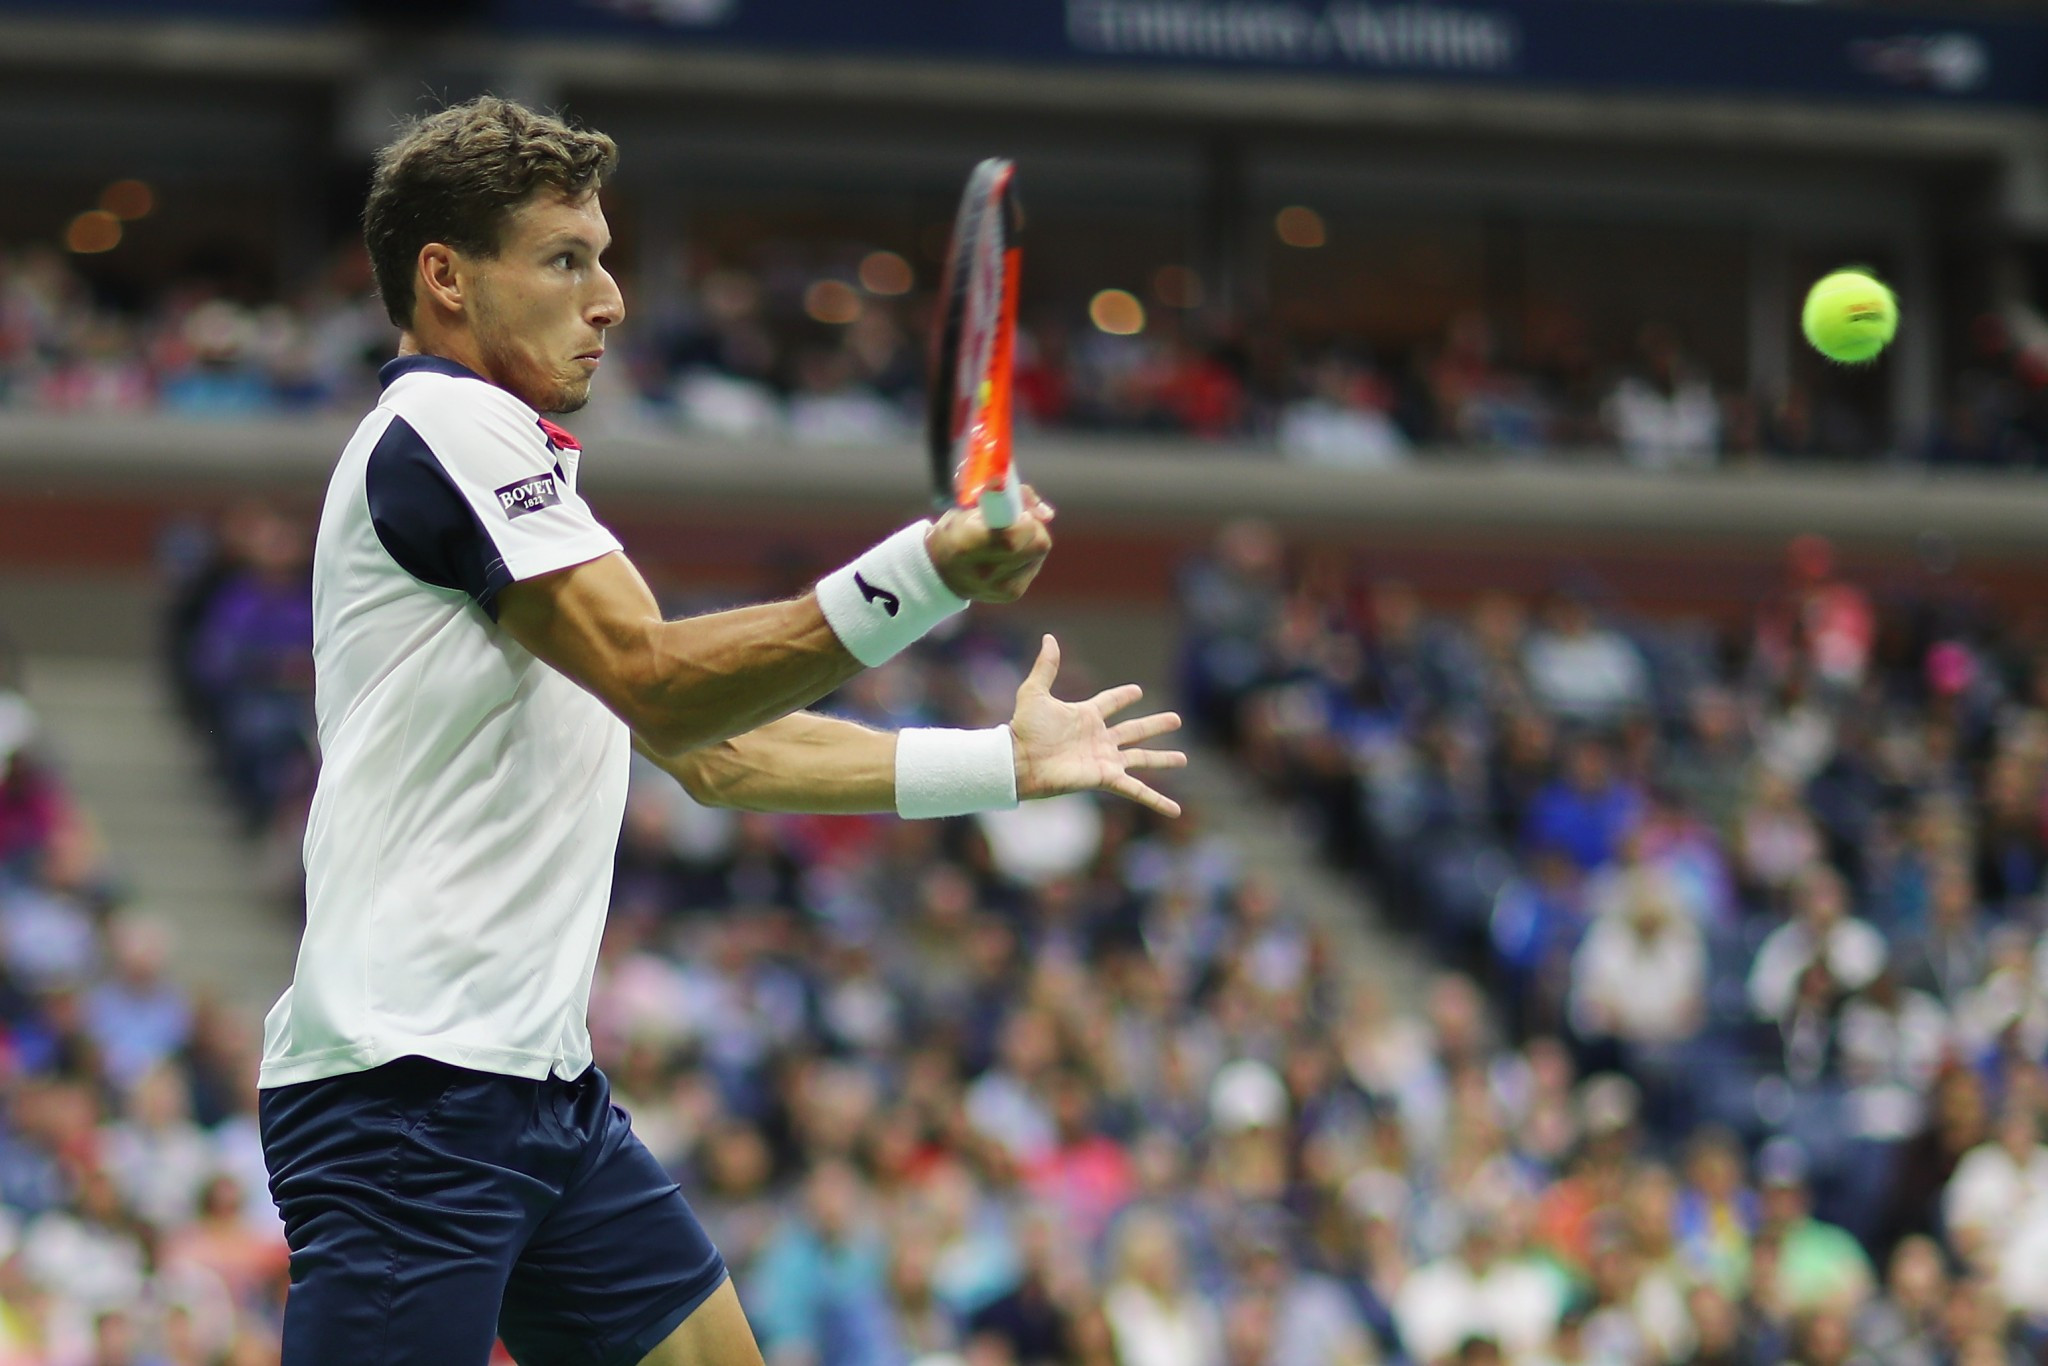 Spain's Pablo Carreño Busta is through to the US Open quarter-finals for the first time ©Getty Images